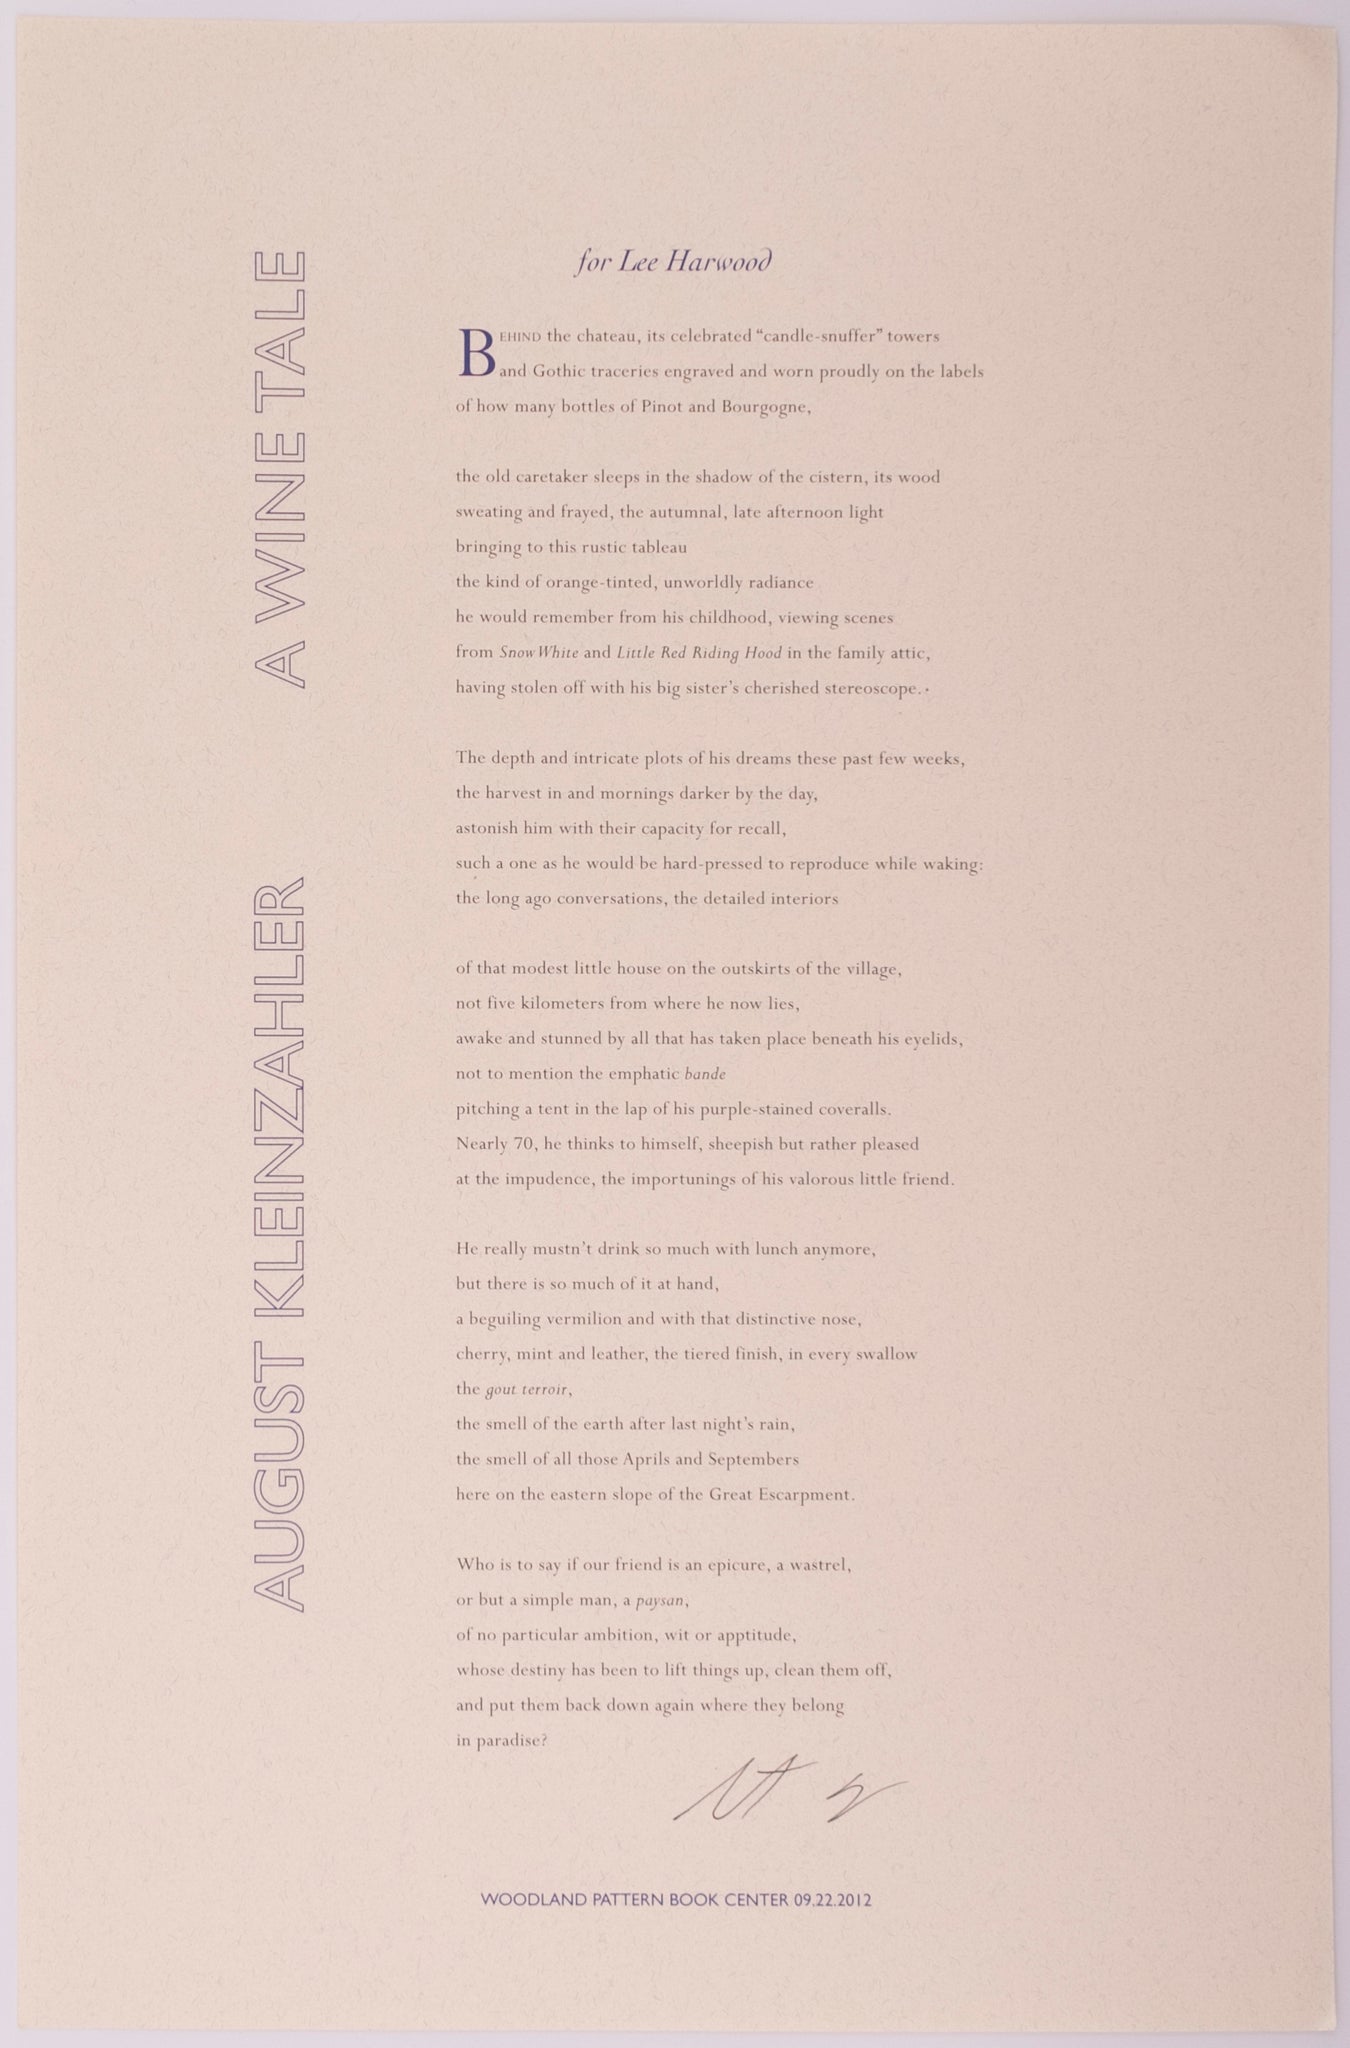 Broadside titled a wine tale by August kleinzahler. Blue and black text on grey paper.